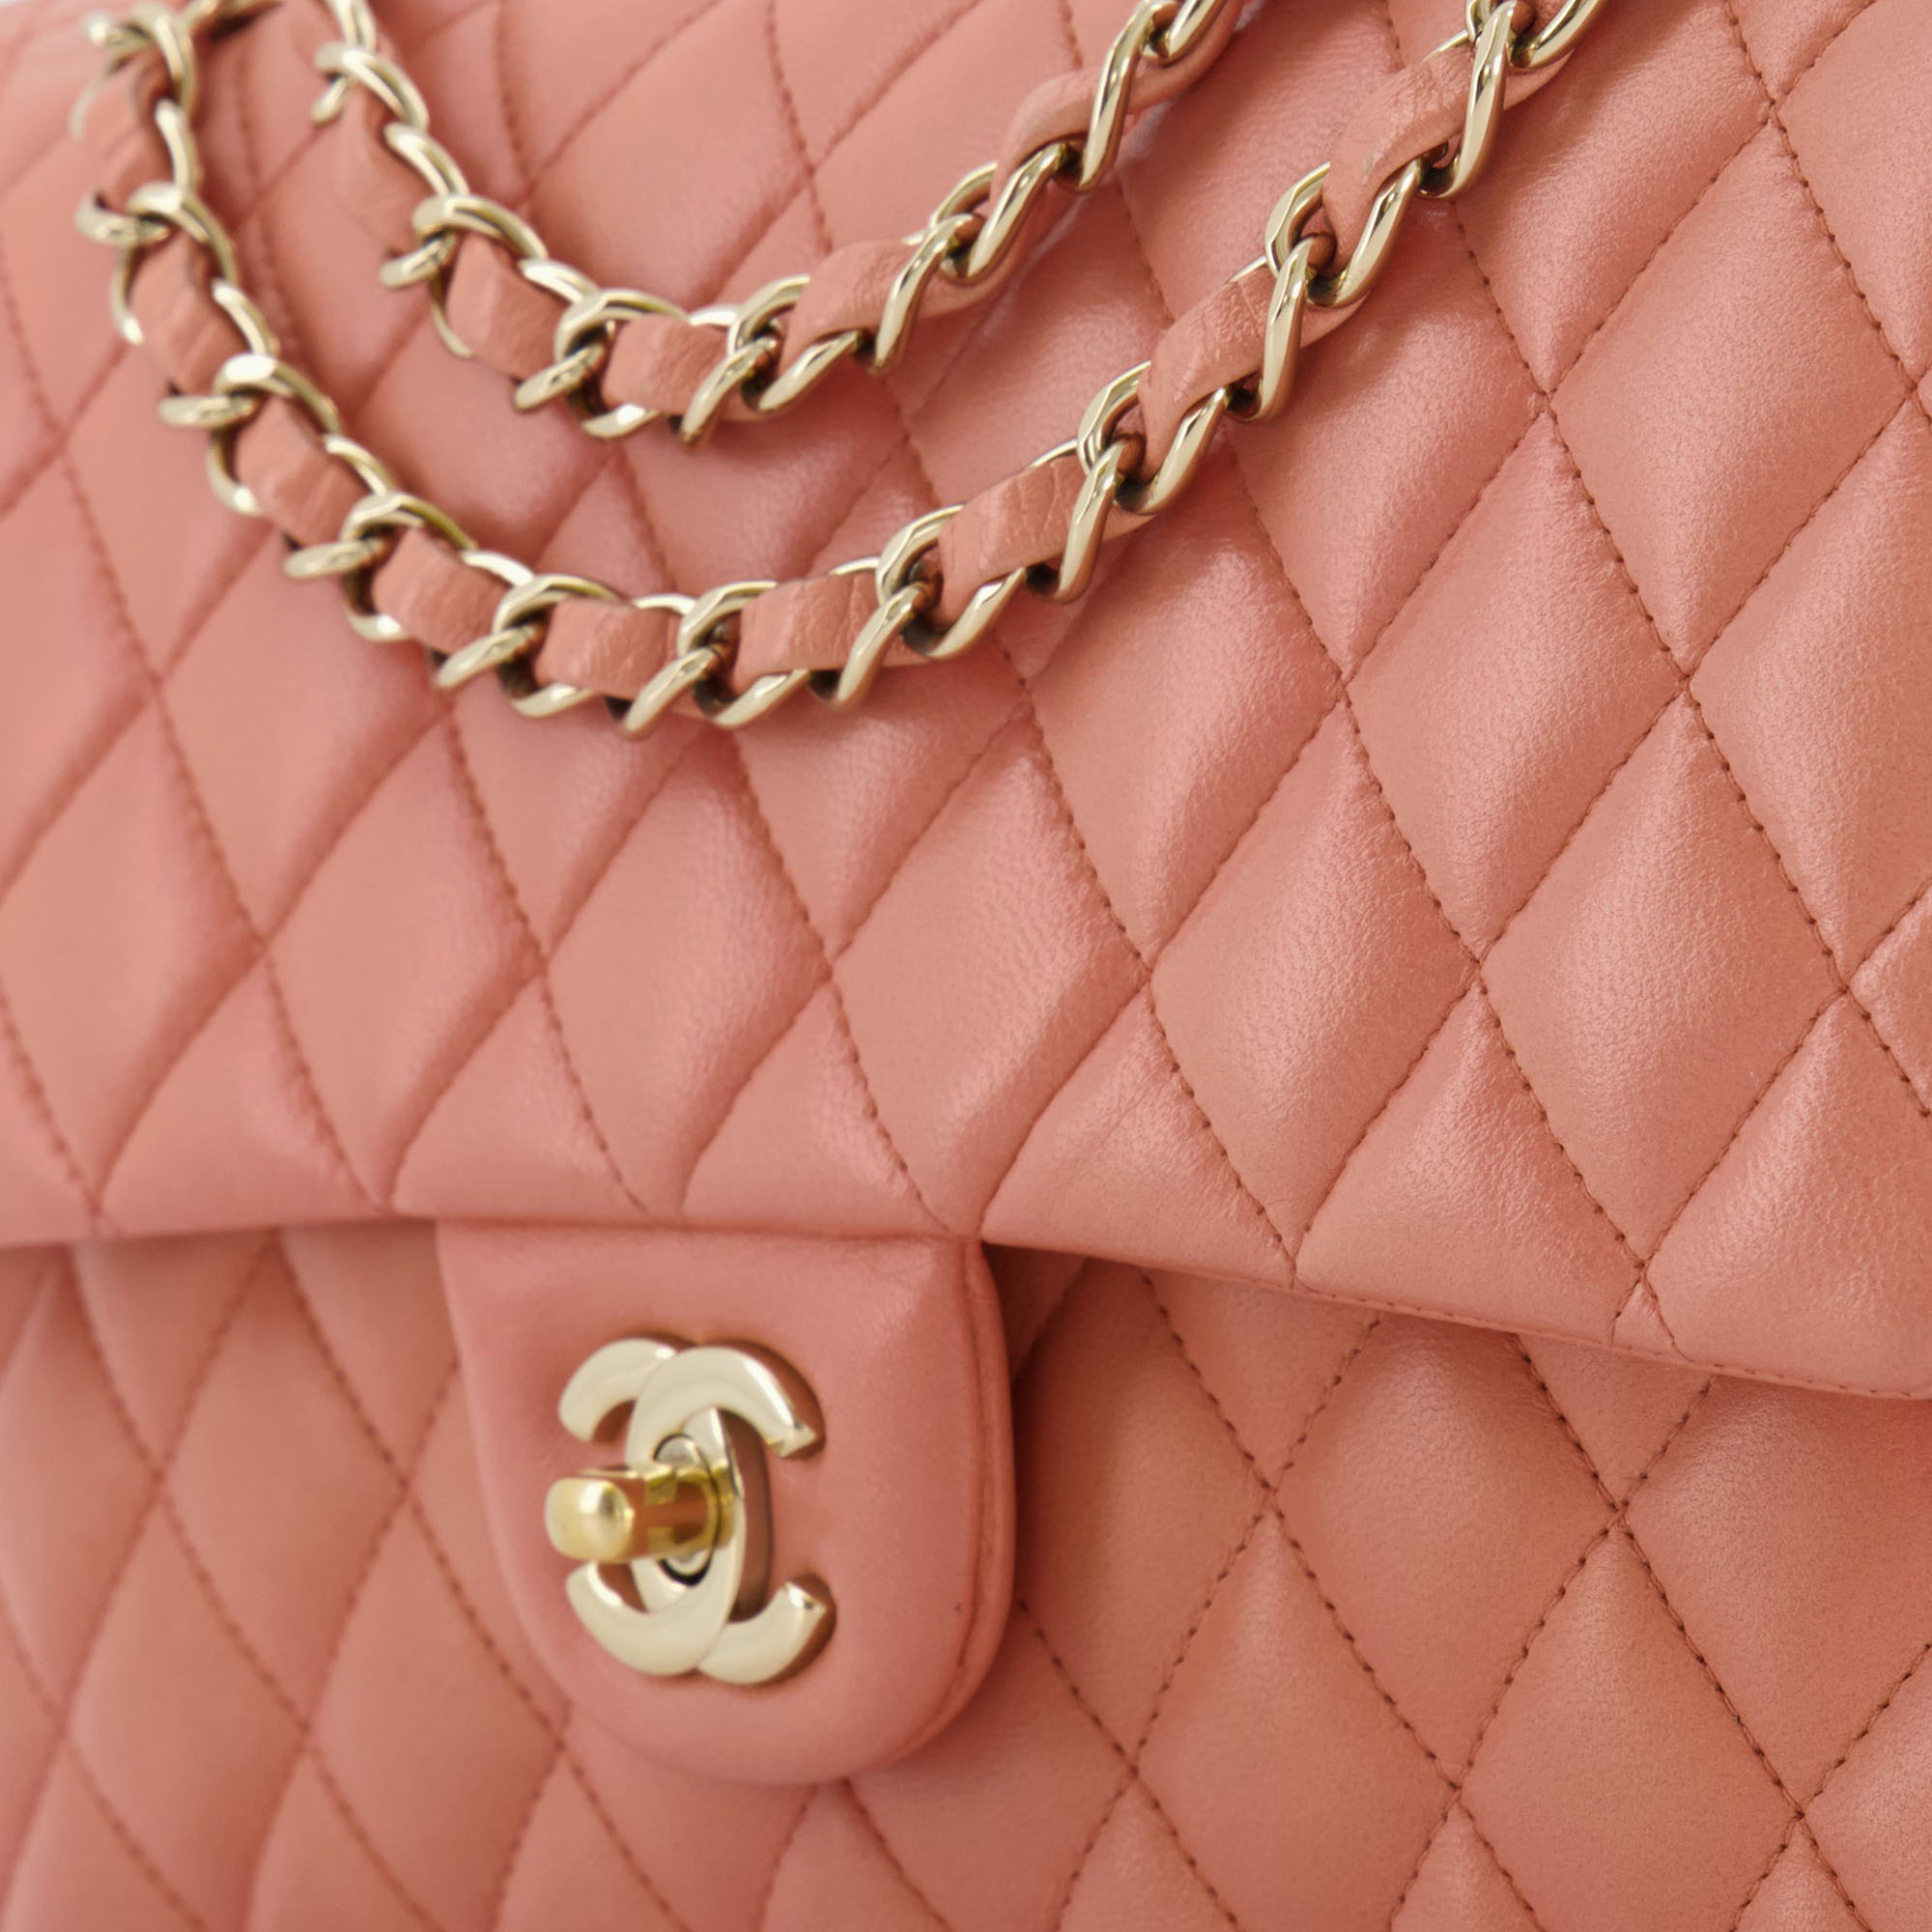 Chanel Peach Pink Lambskin Medium Classic Double Flap Bag With Champagne Gold Hardware